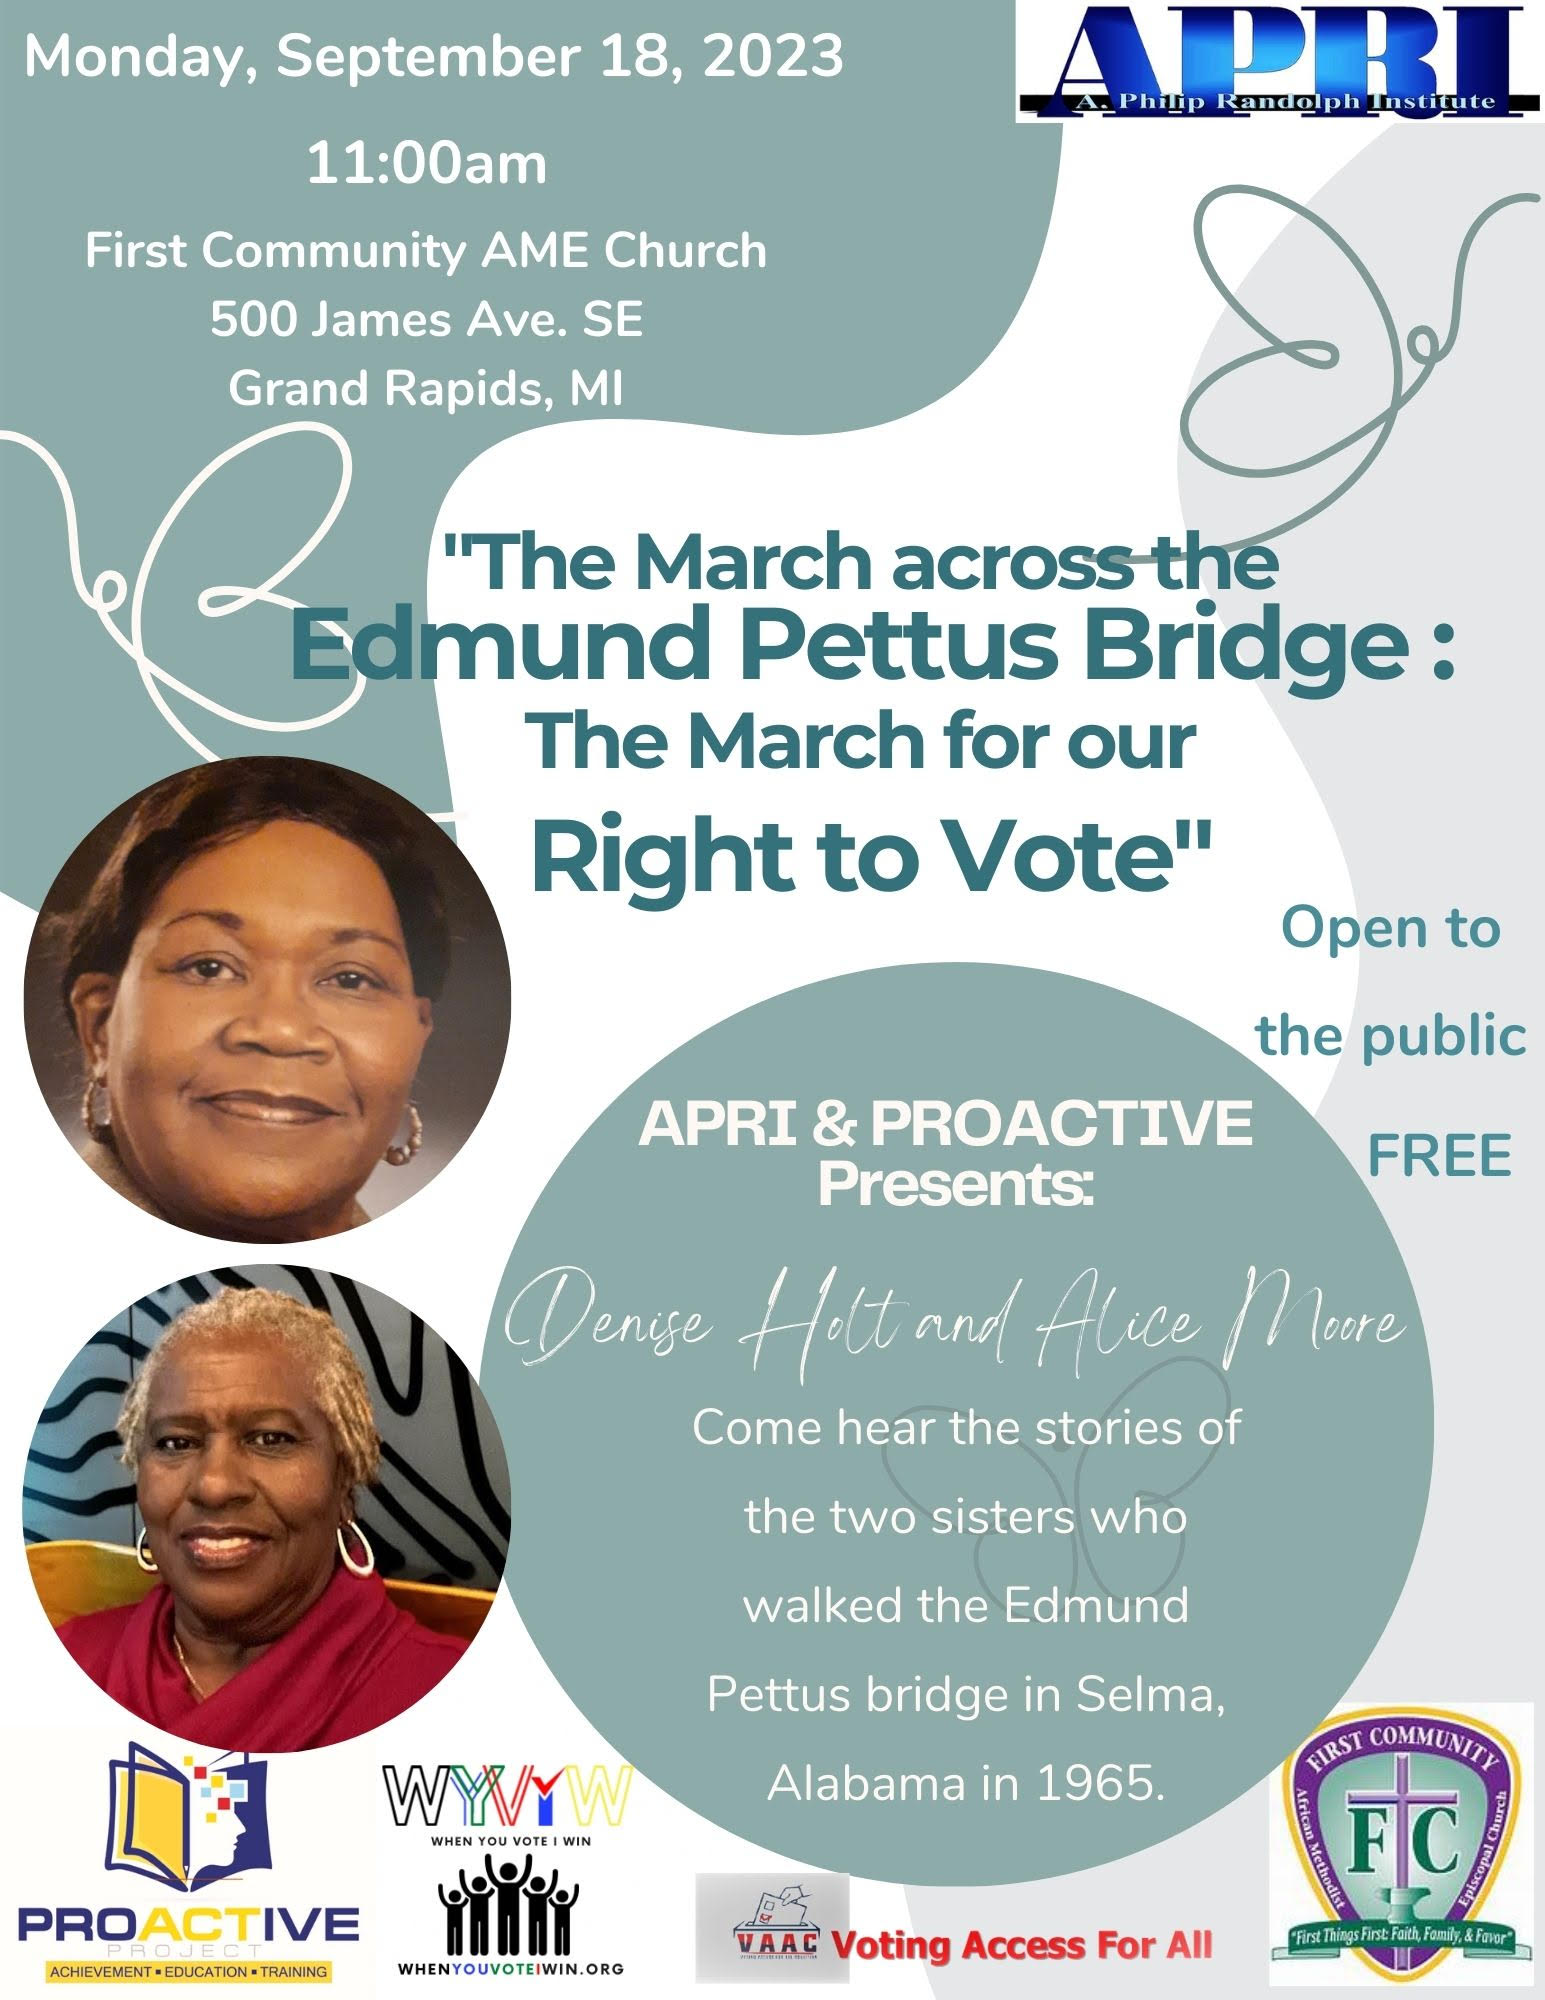 The March Across the Edmund Pettus Bridge: The March for Our Right to Vote in Grand Rapids